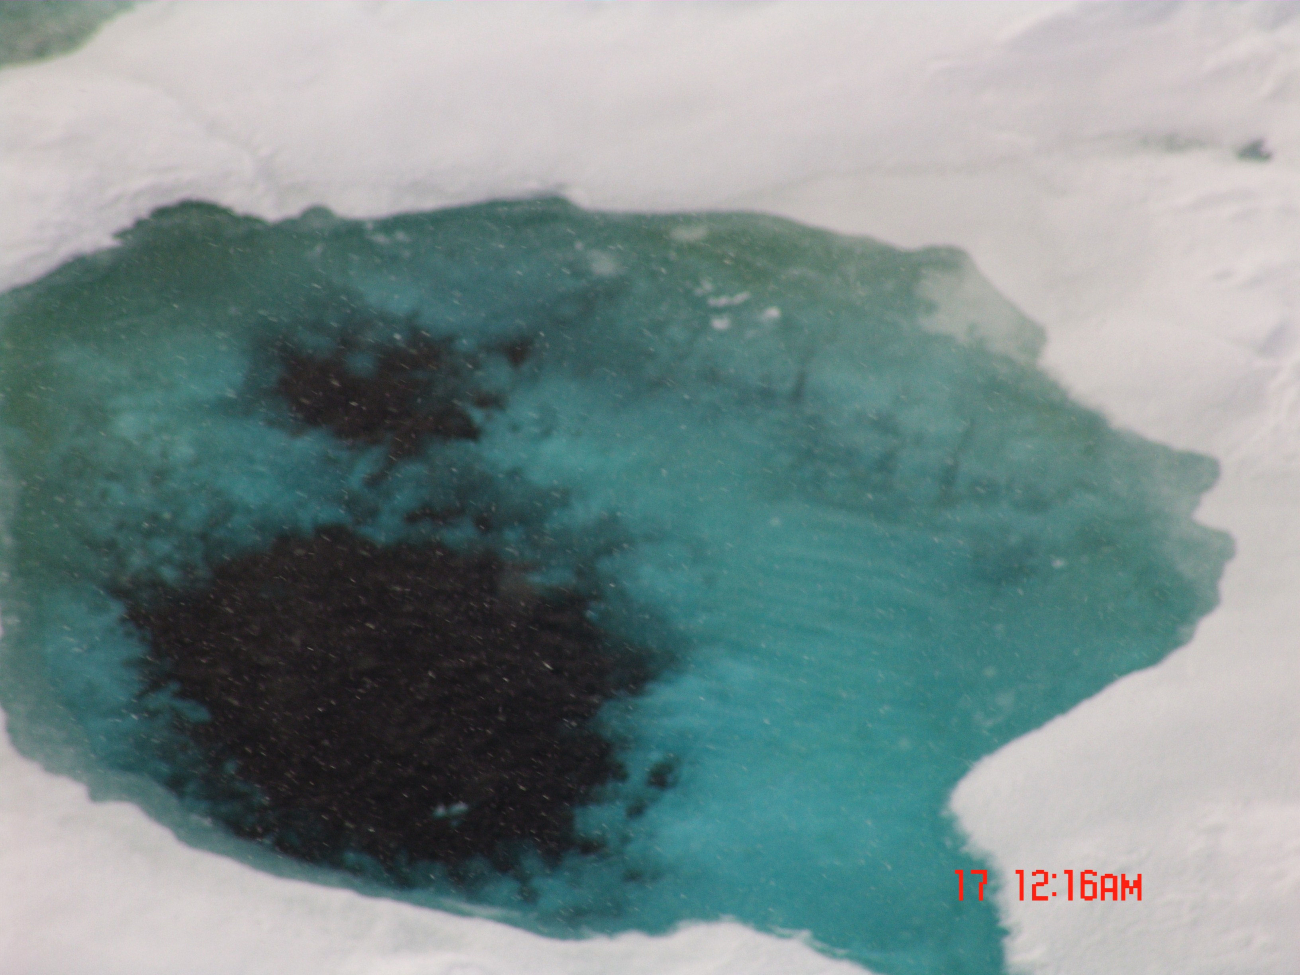 Looking down to aquamarine colored ice with melt ponds breaking through tounderlying seawater